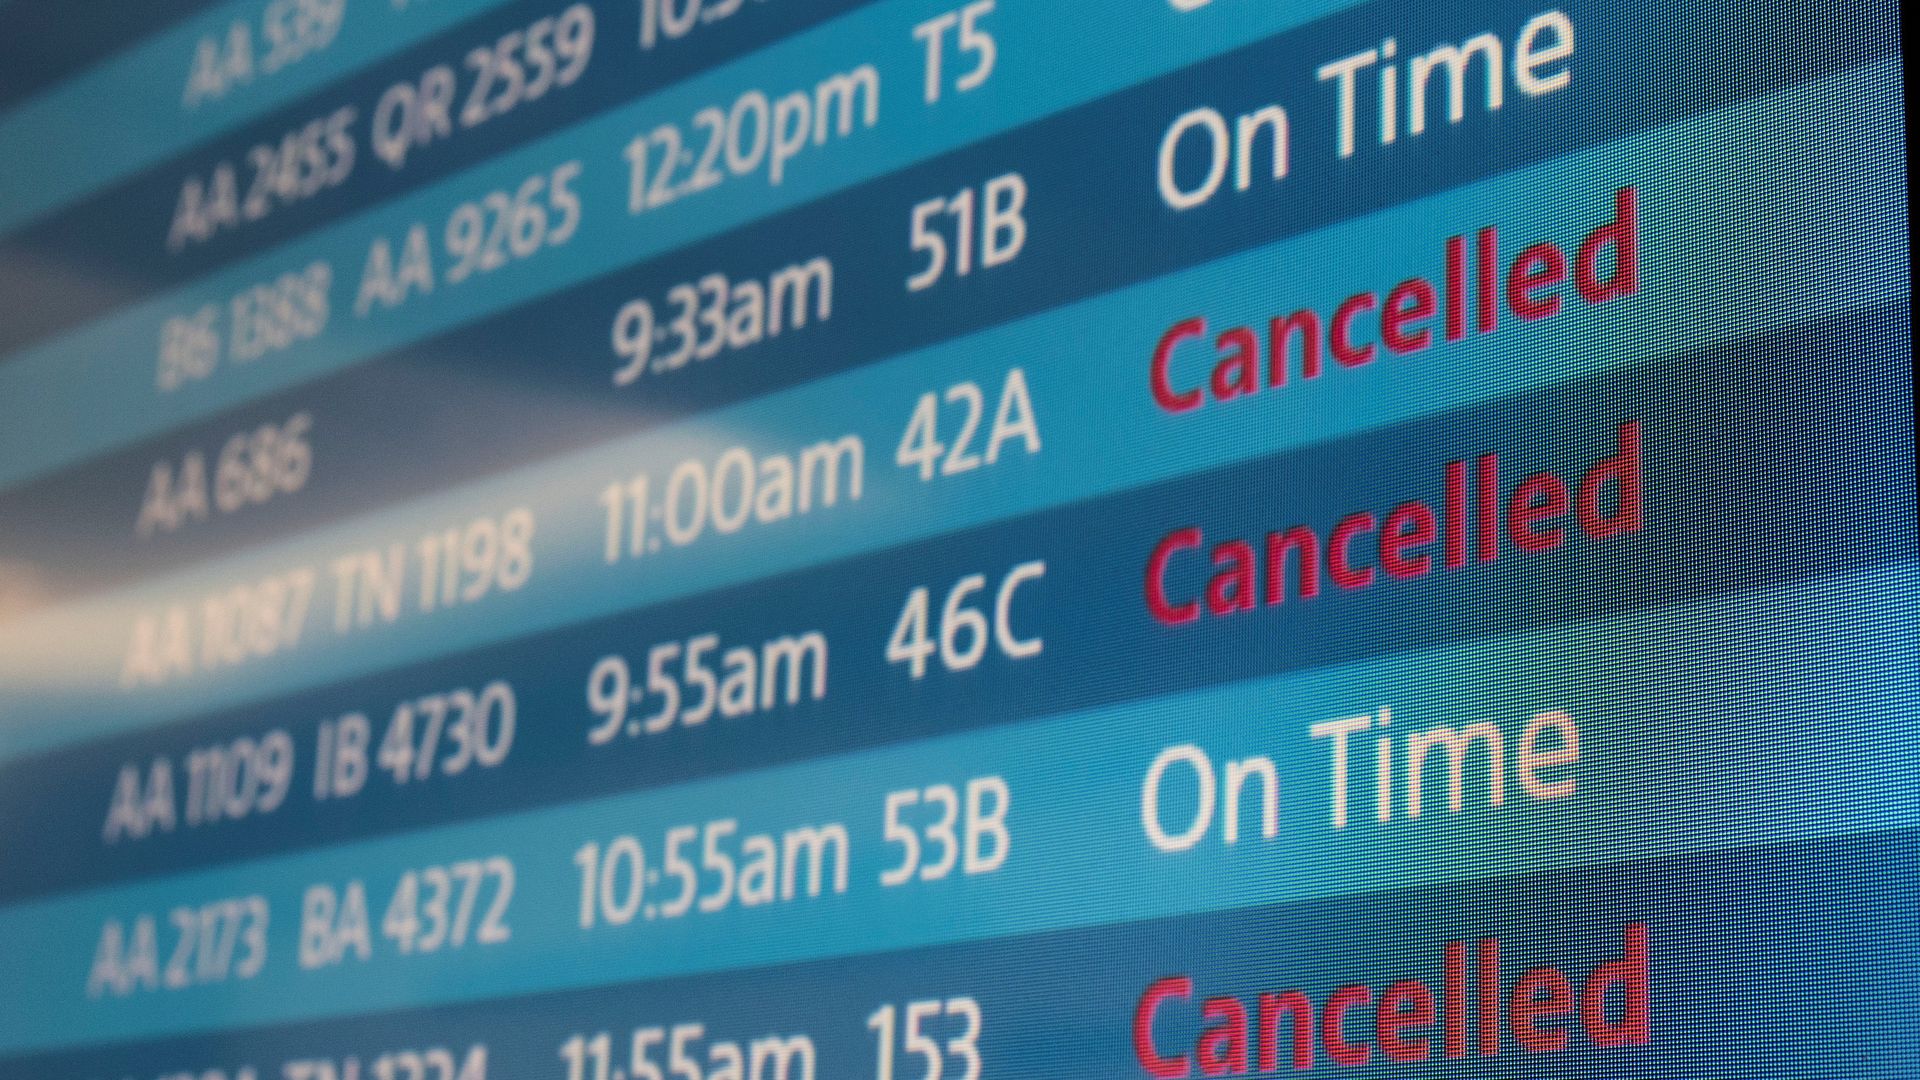 Cancellation board at airport